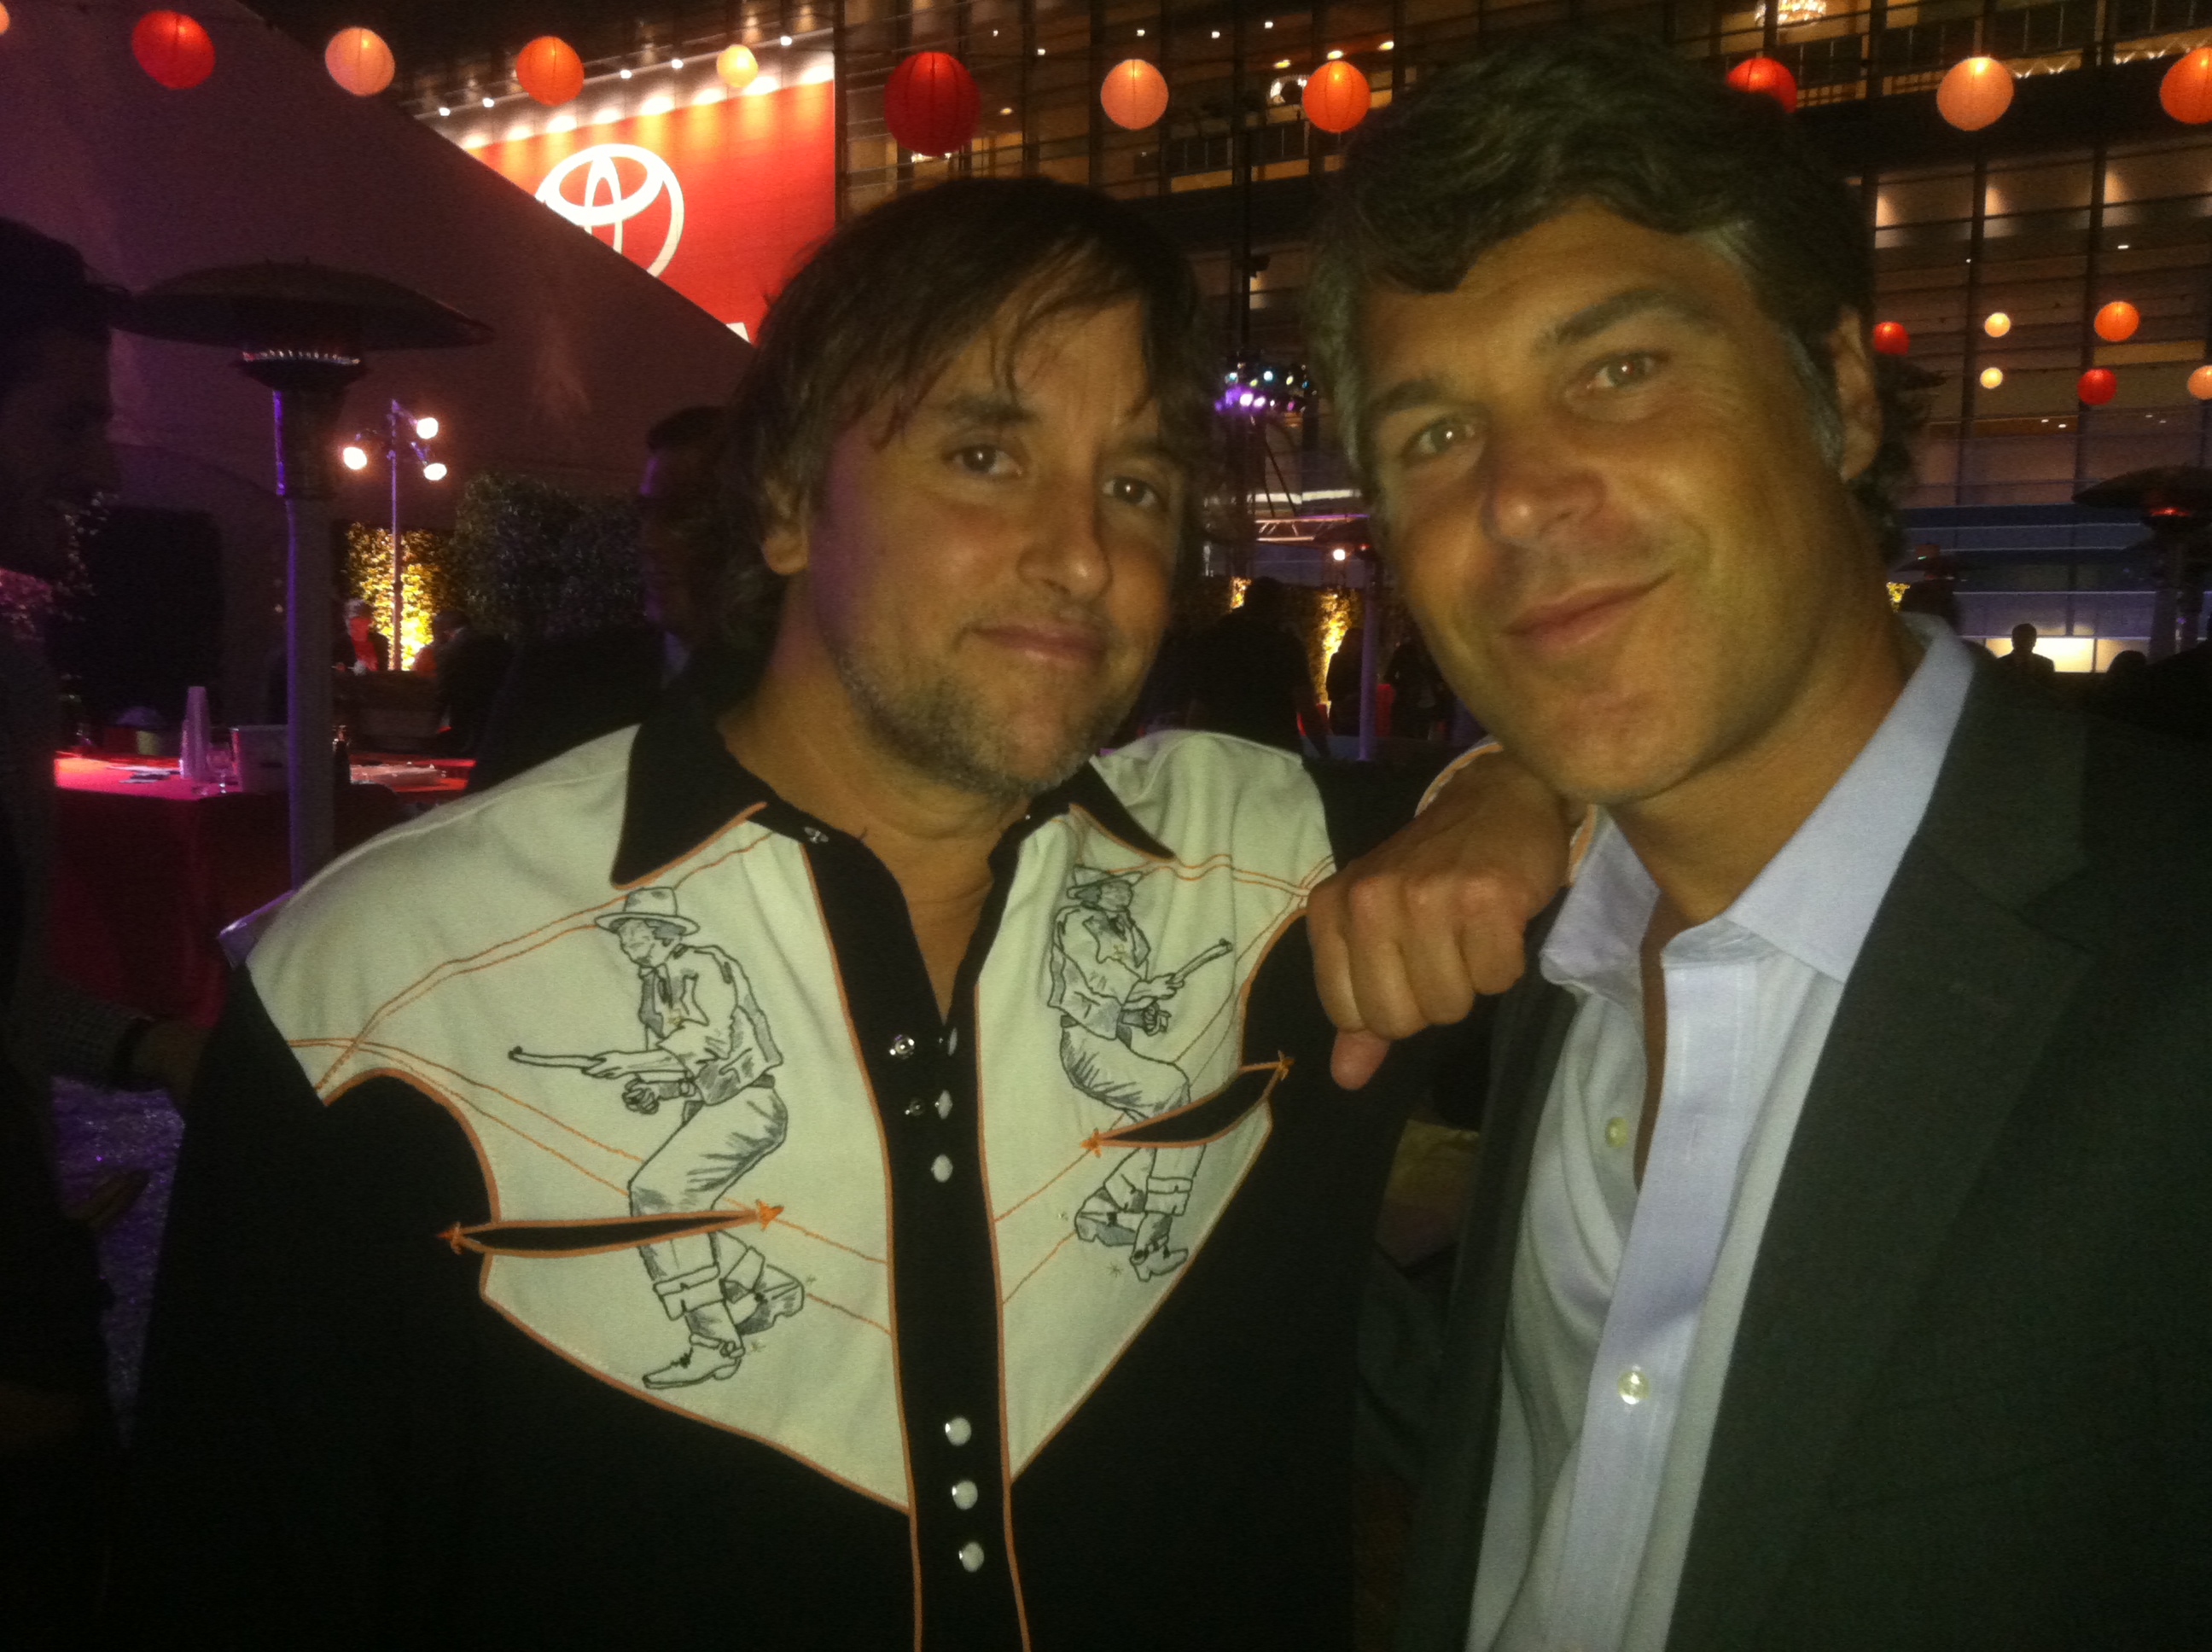 Director Richard Linklater and Producer Todd Labarowski at the LA Film Festival after party for the premiere 'Bernie'. June 16, 2011.